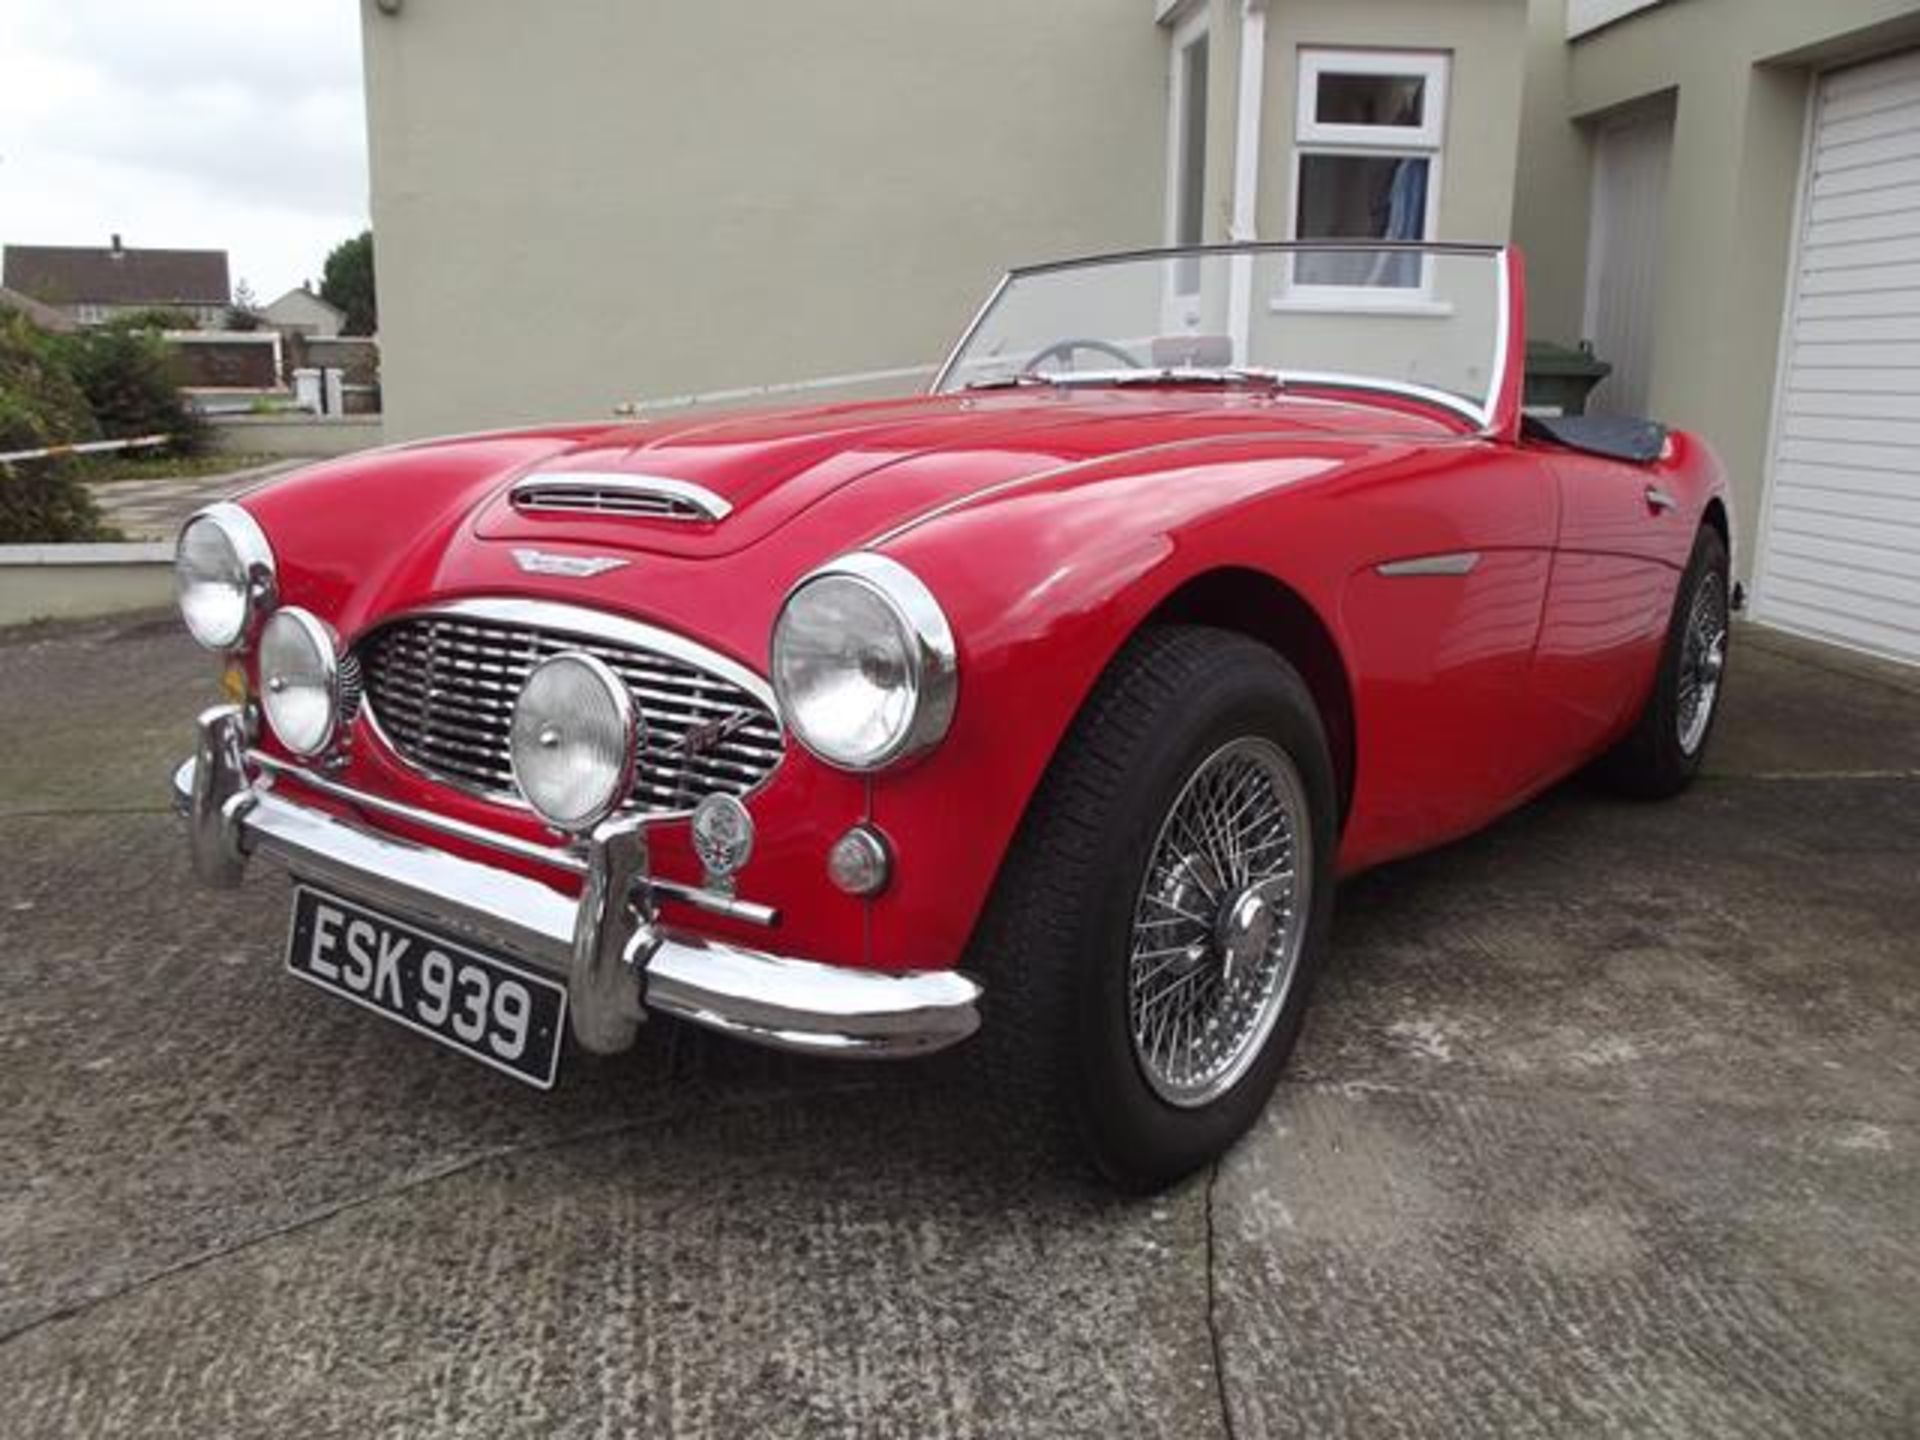 A 1959 Austin Healey 100-6, registration number ESK 939, chassis number BM4LS74919, Colorado red. - Image 6 of 6